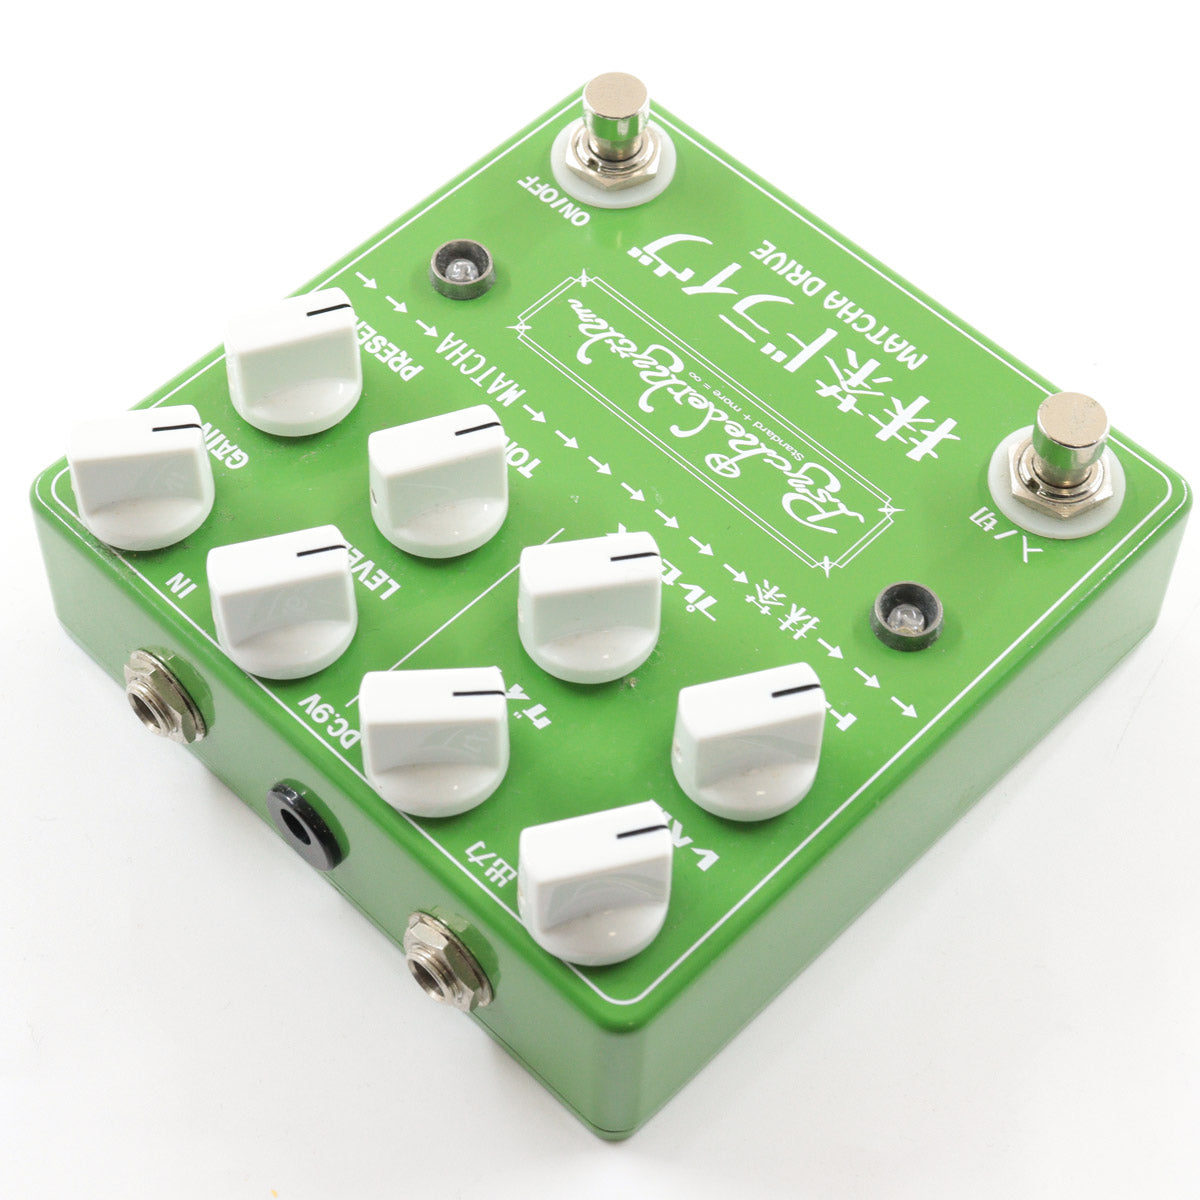 USED PSYCHEDERHYTHM / Matcha Drive / Matcha Drive overdrive for guitar [08]